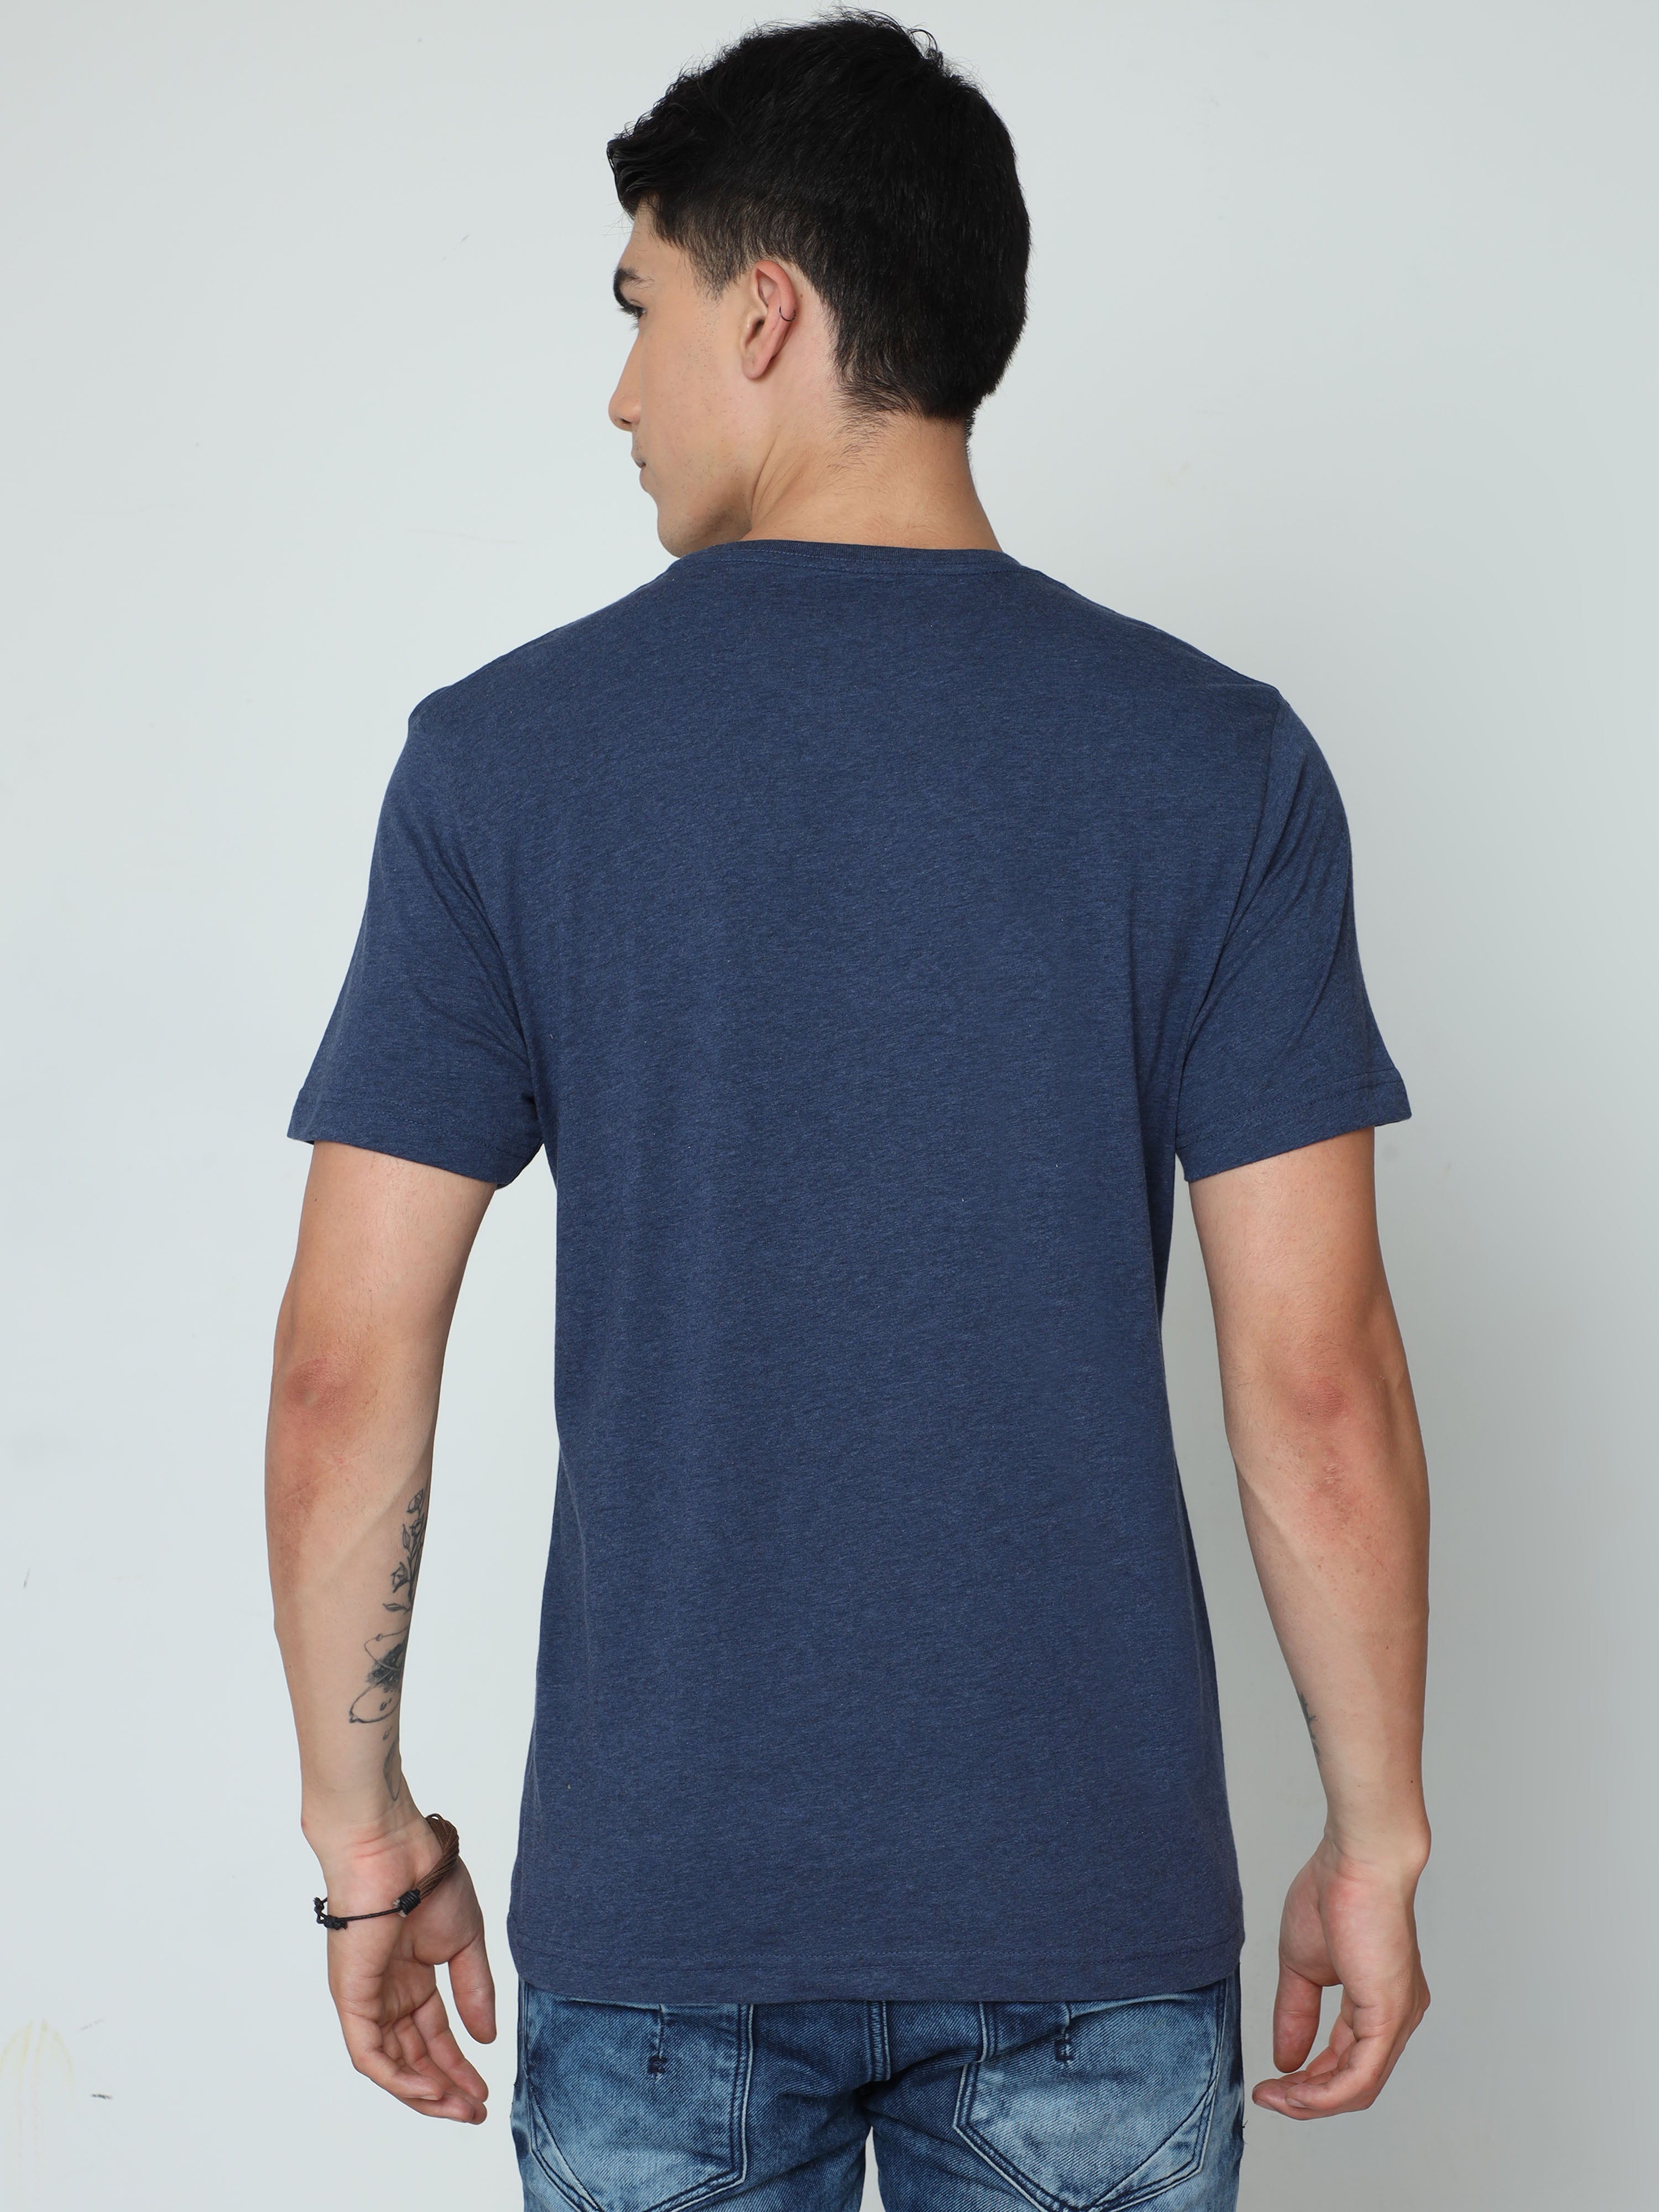 Classic Polo Mens 100% Cotton Navy Solid Crew Neck Half Sleeves Slim Fit T-Shirt |Cp-Rn-19